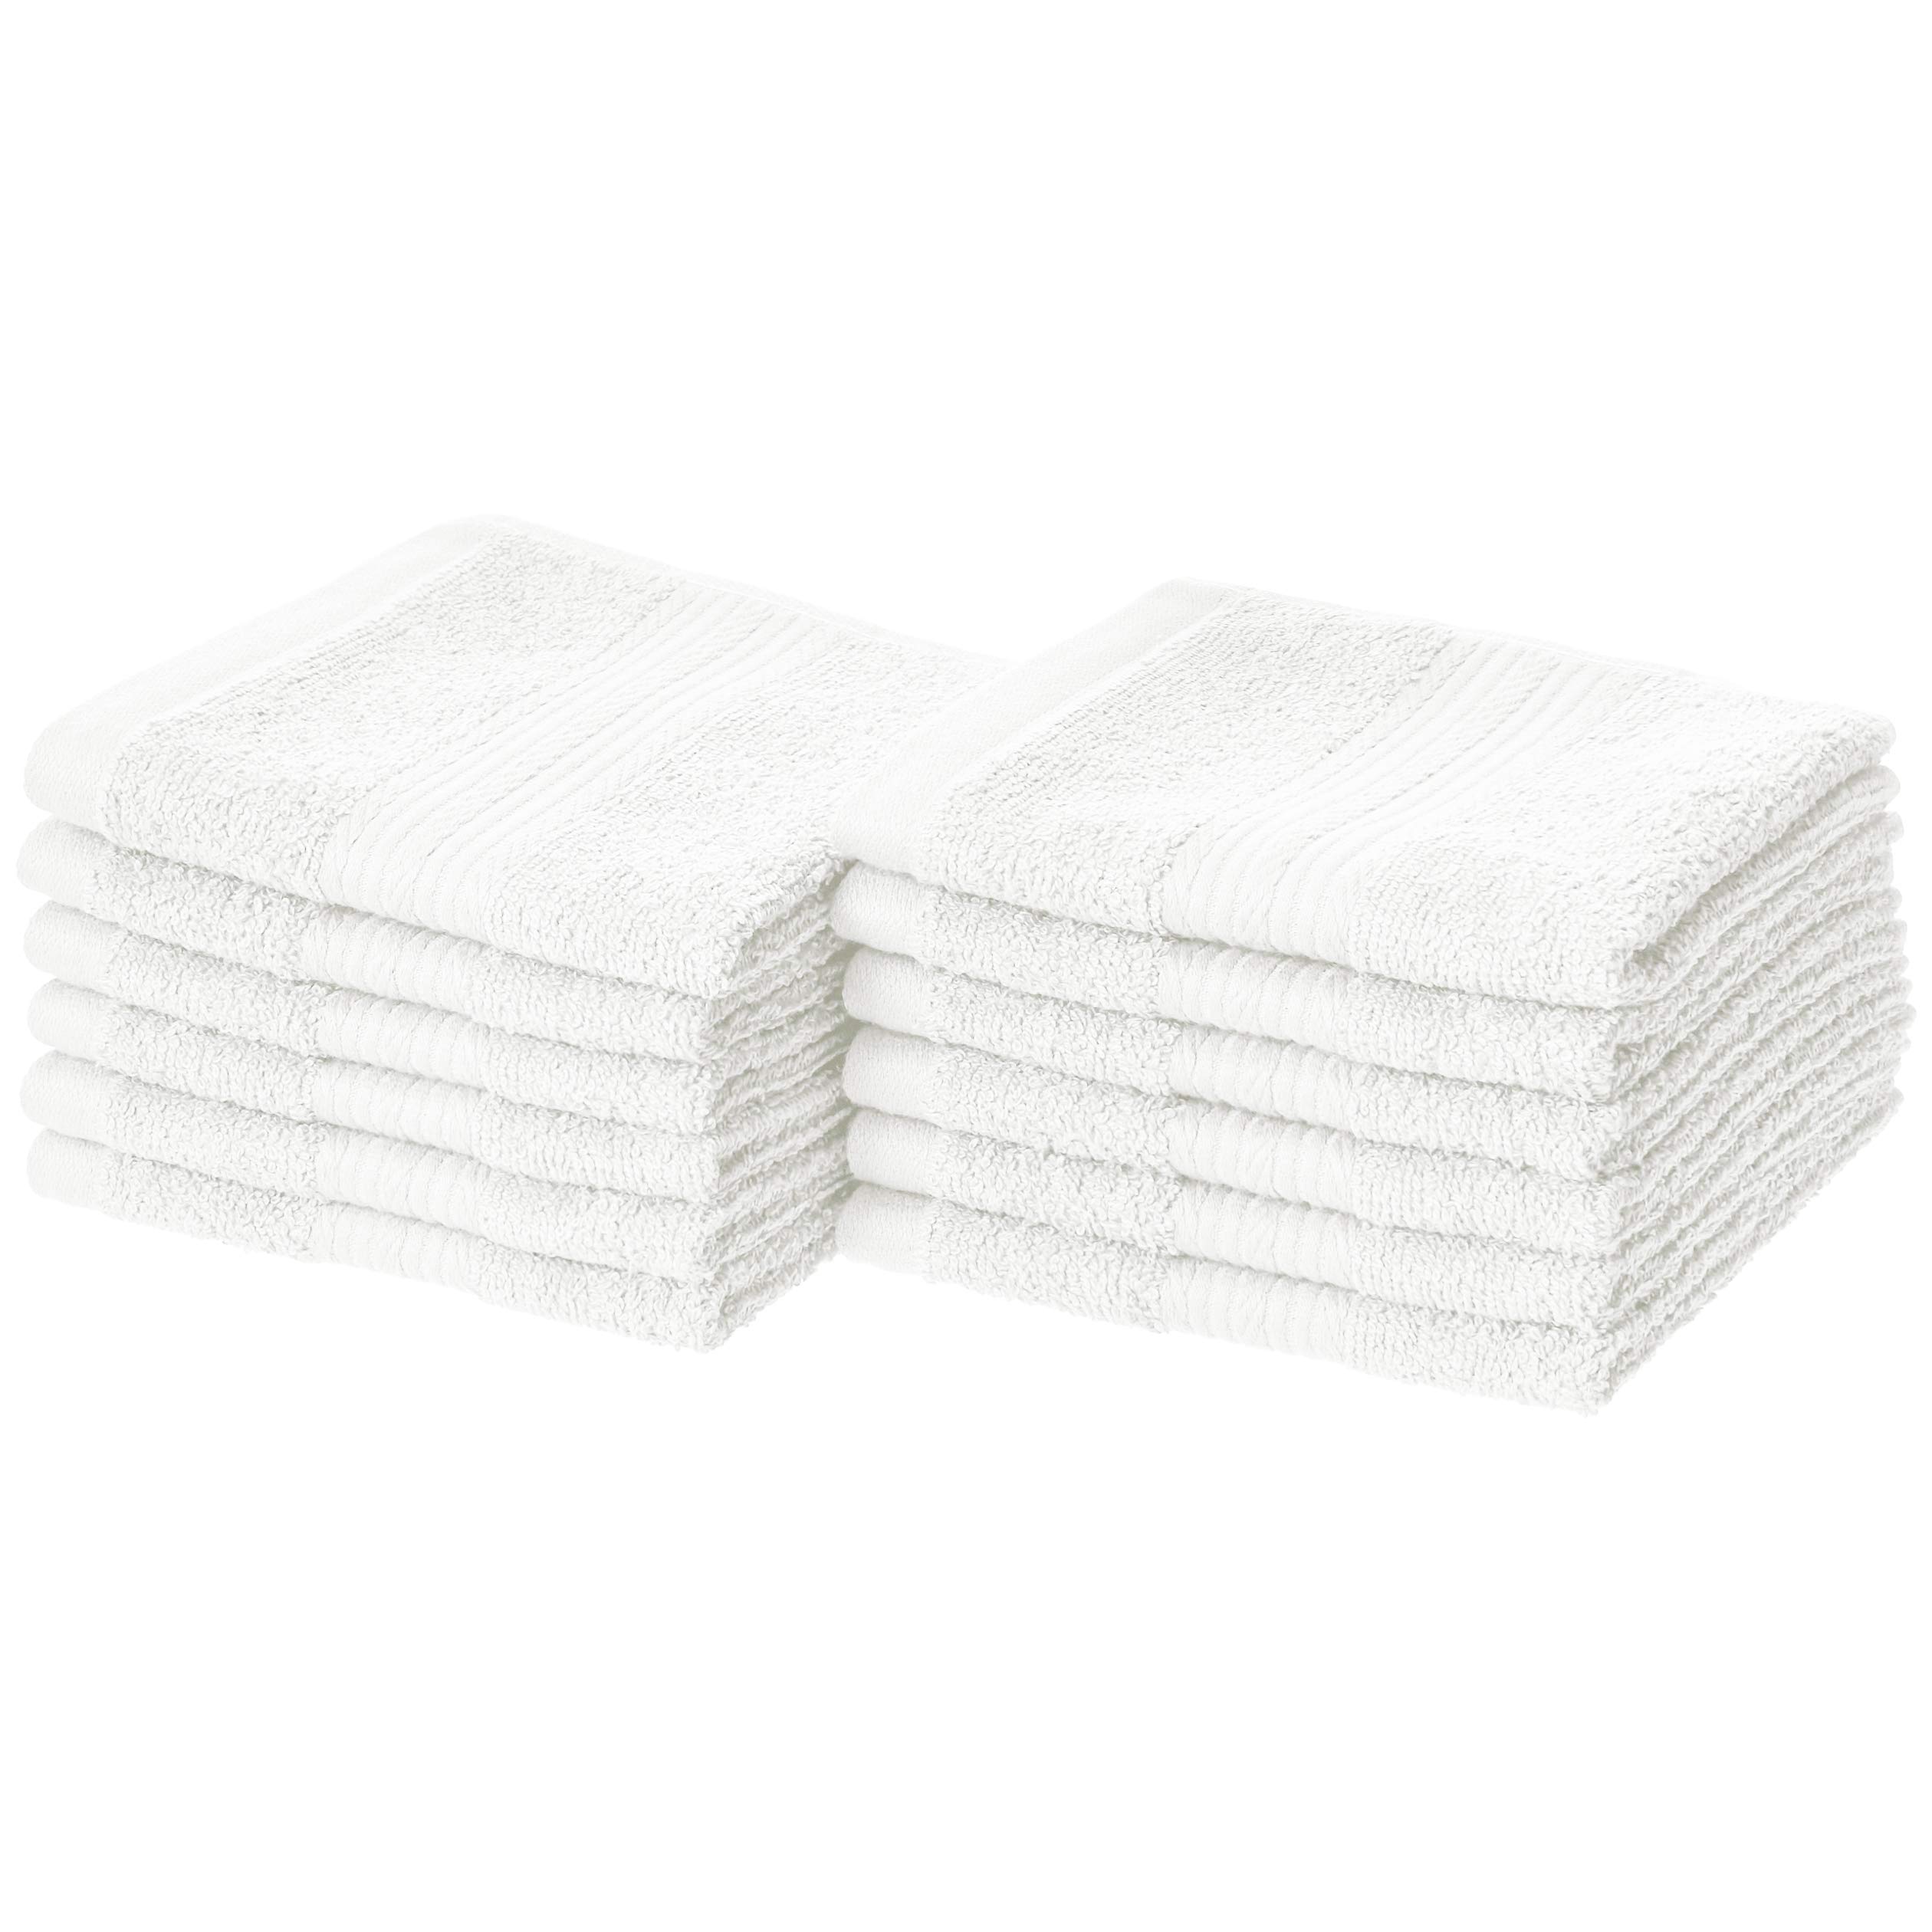 Book Cover Amazon Basics Fade-Resistant Cotton Washcloth - 12-Pack, White White Washcloth (Pack of 12)